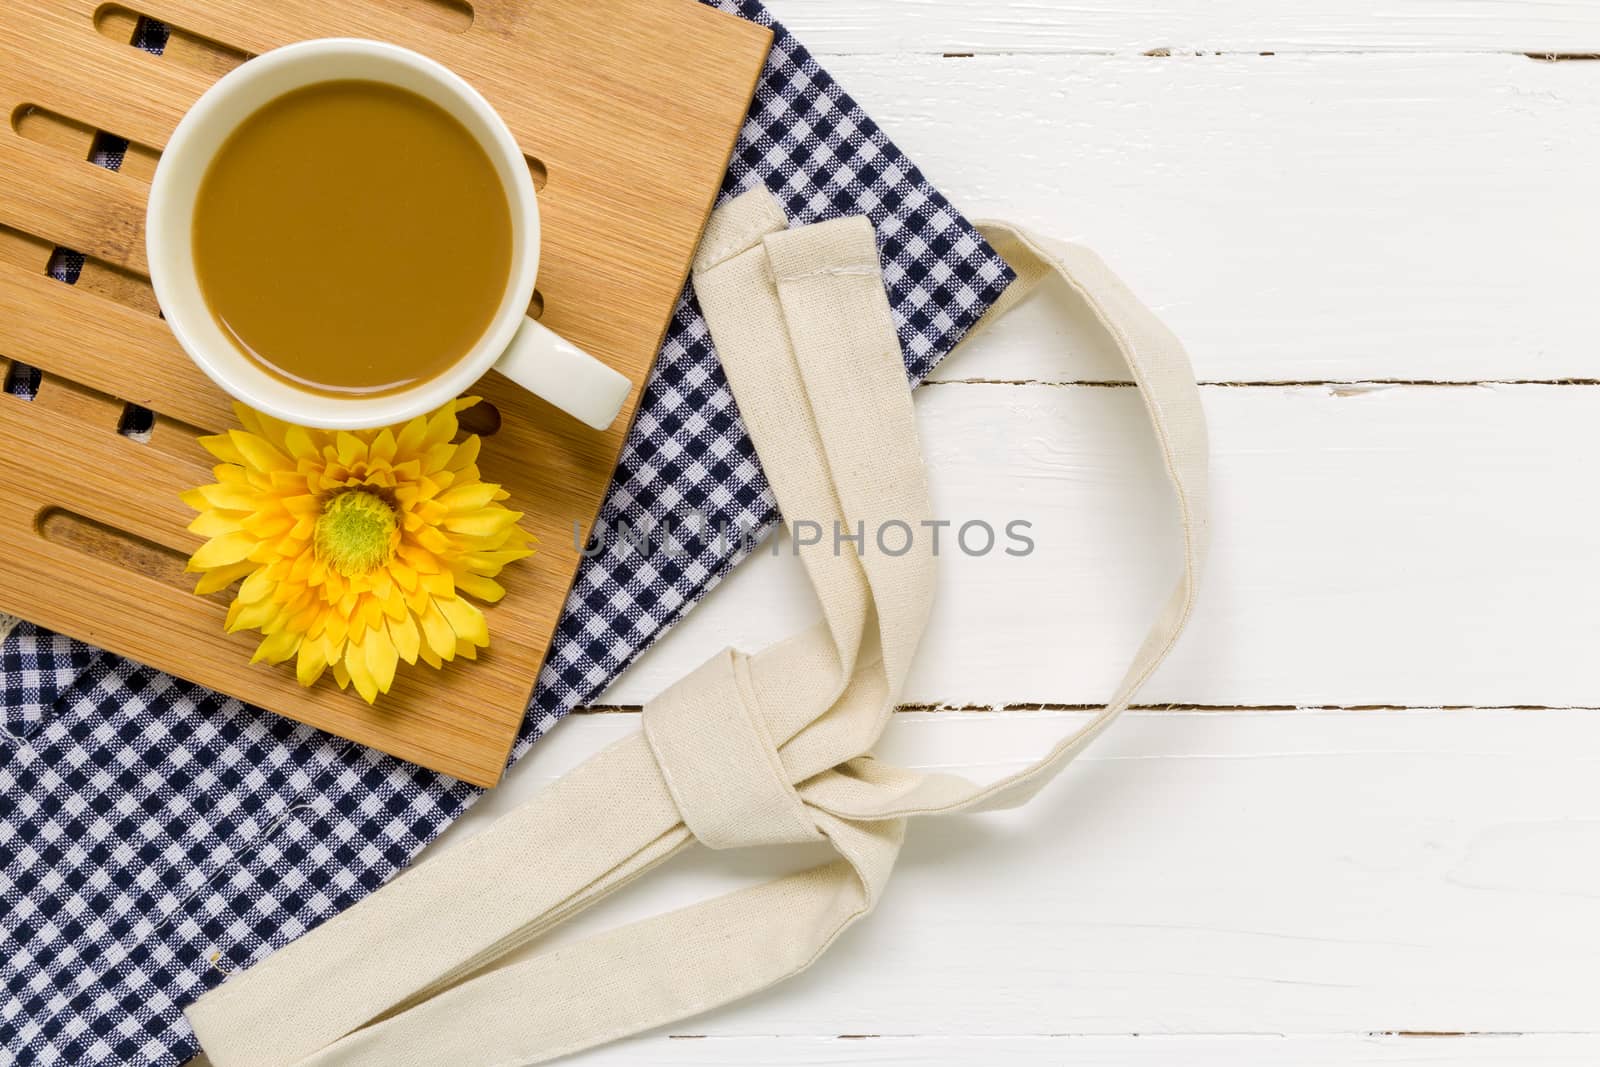 Relaxing break with coffee cup and white wooden background.